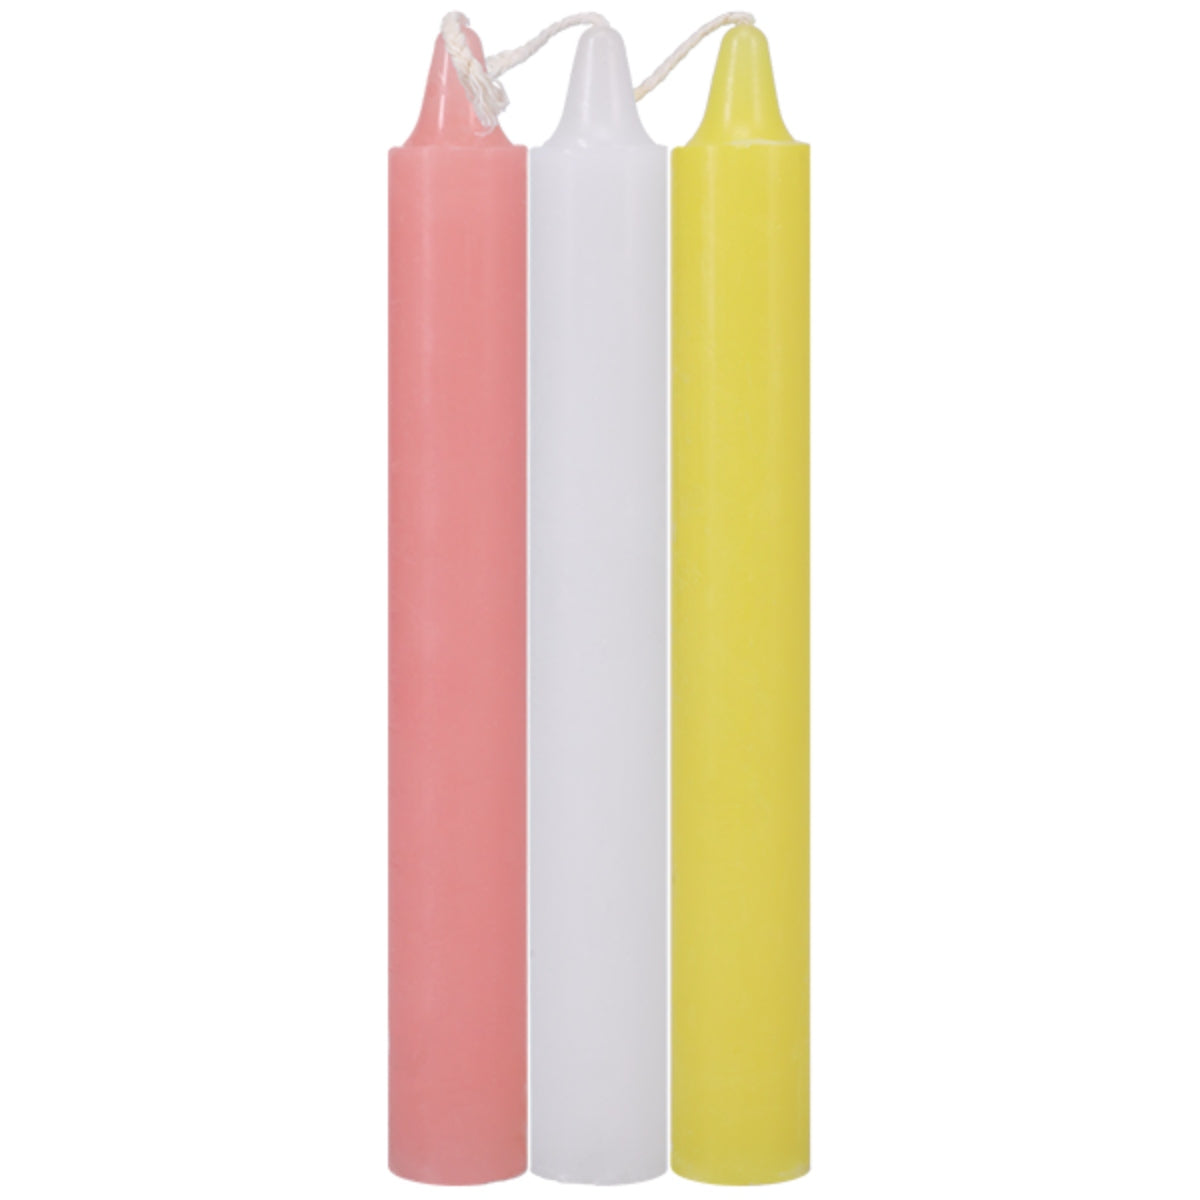 Japanese Drip Candles - 3 Pack Multi